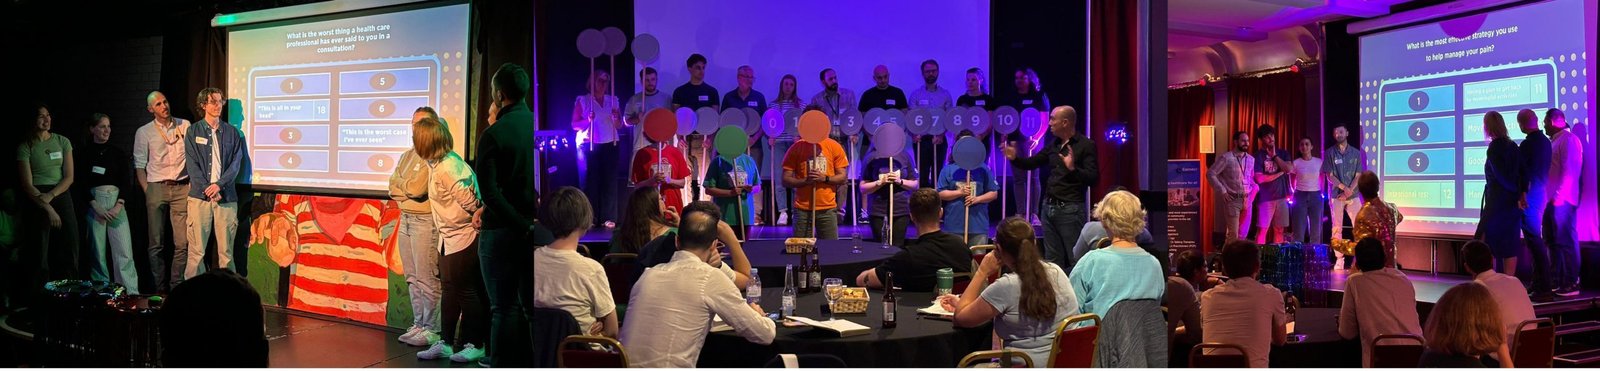 Event attendees participated in 'gameshow'-style exercises